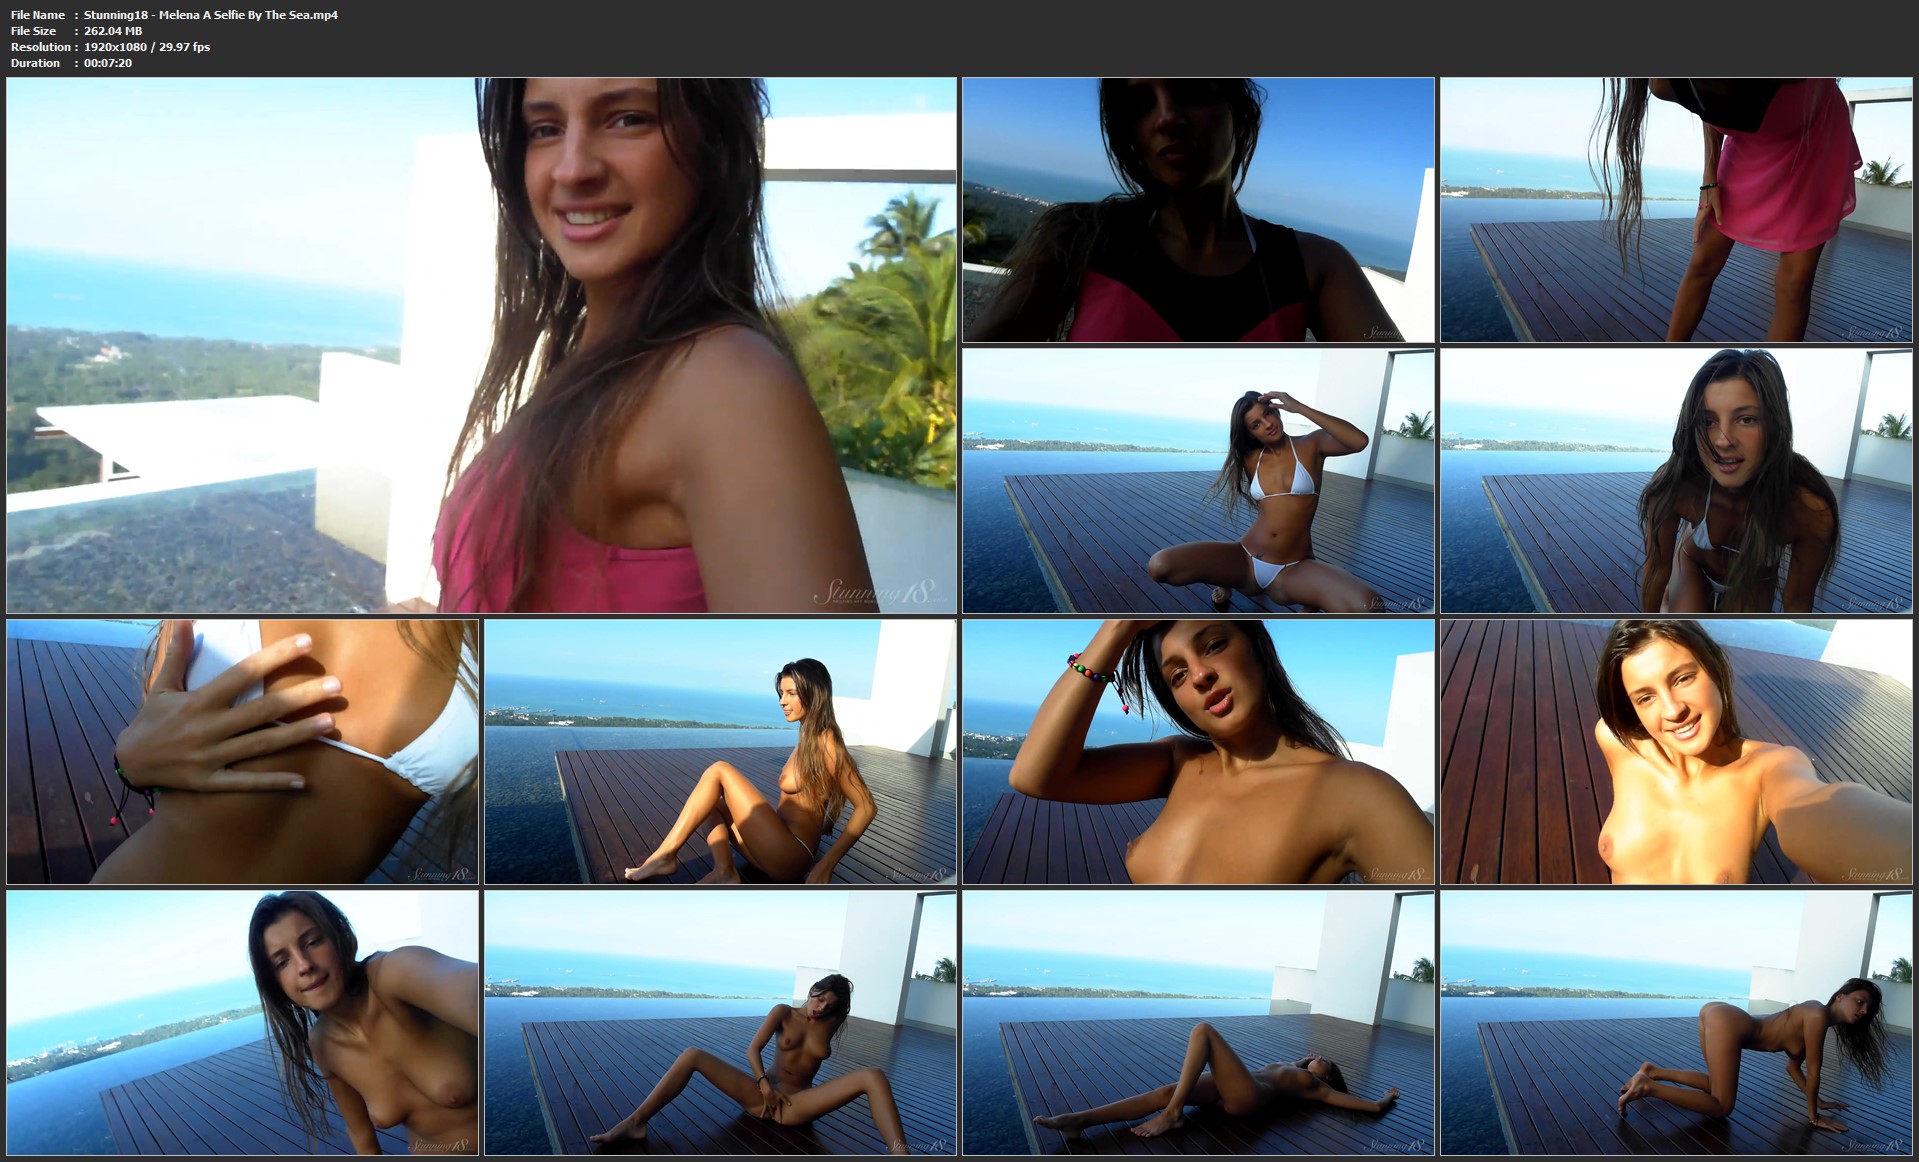 Stunning18 - Melena A Selfie By The Sea